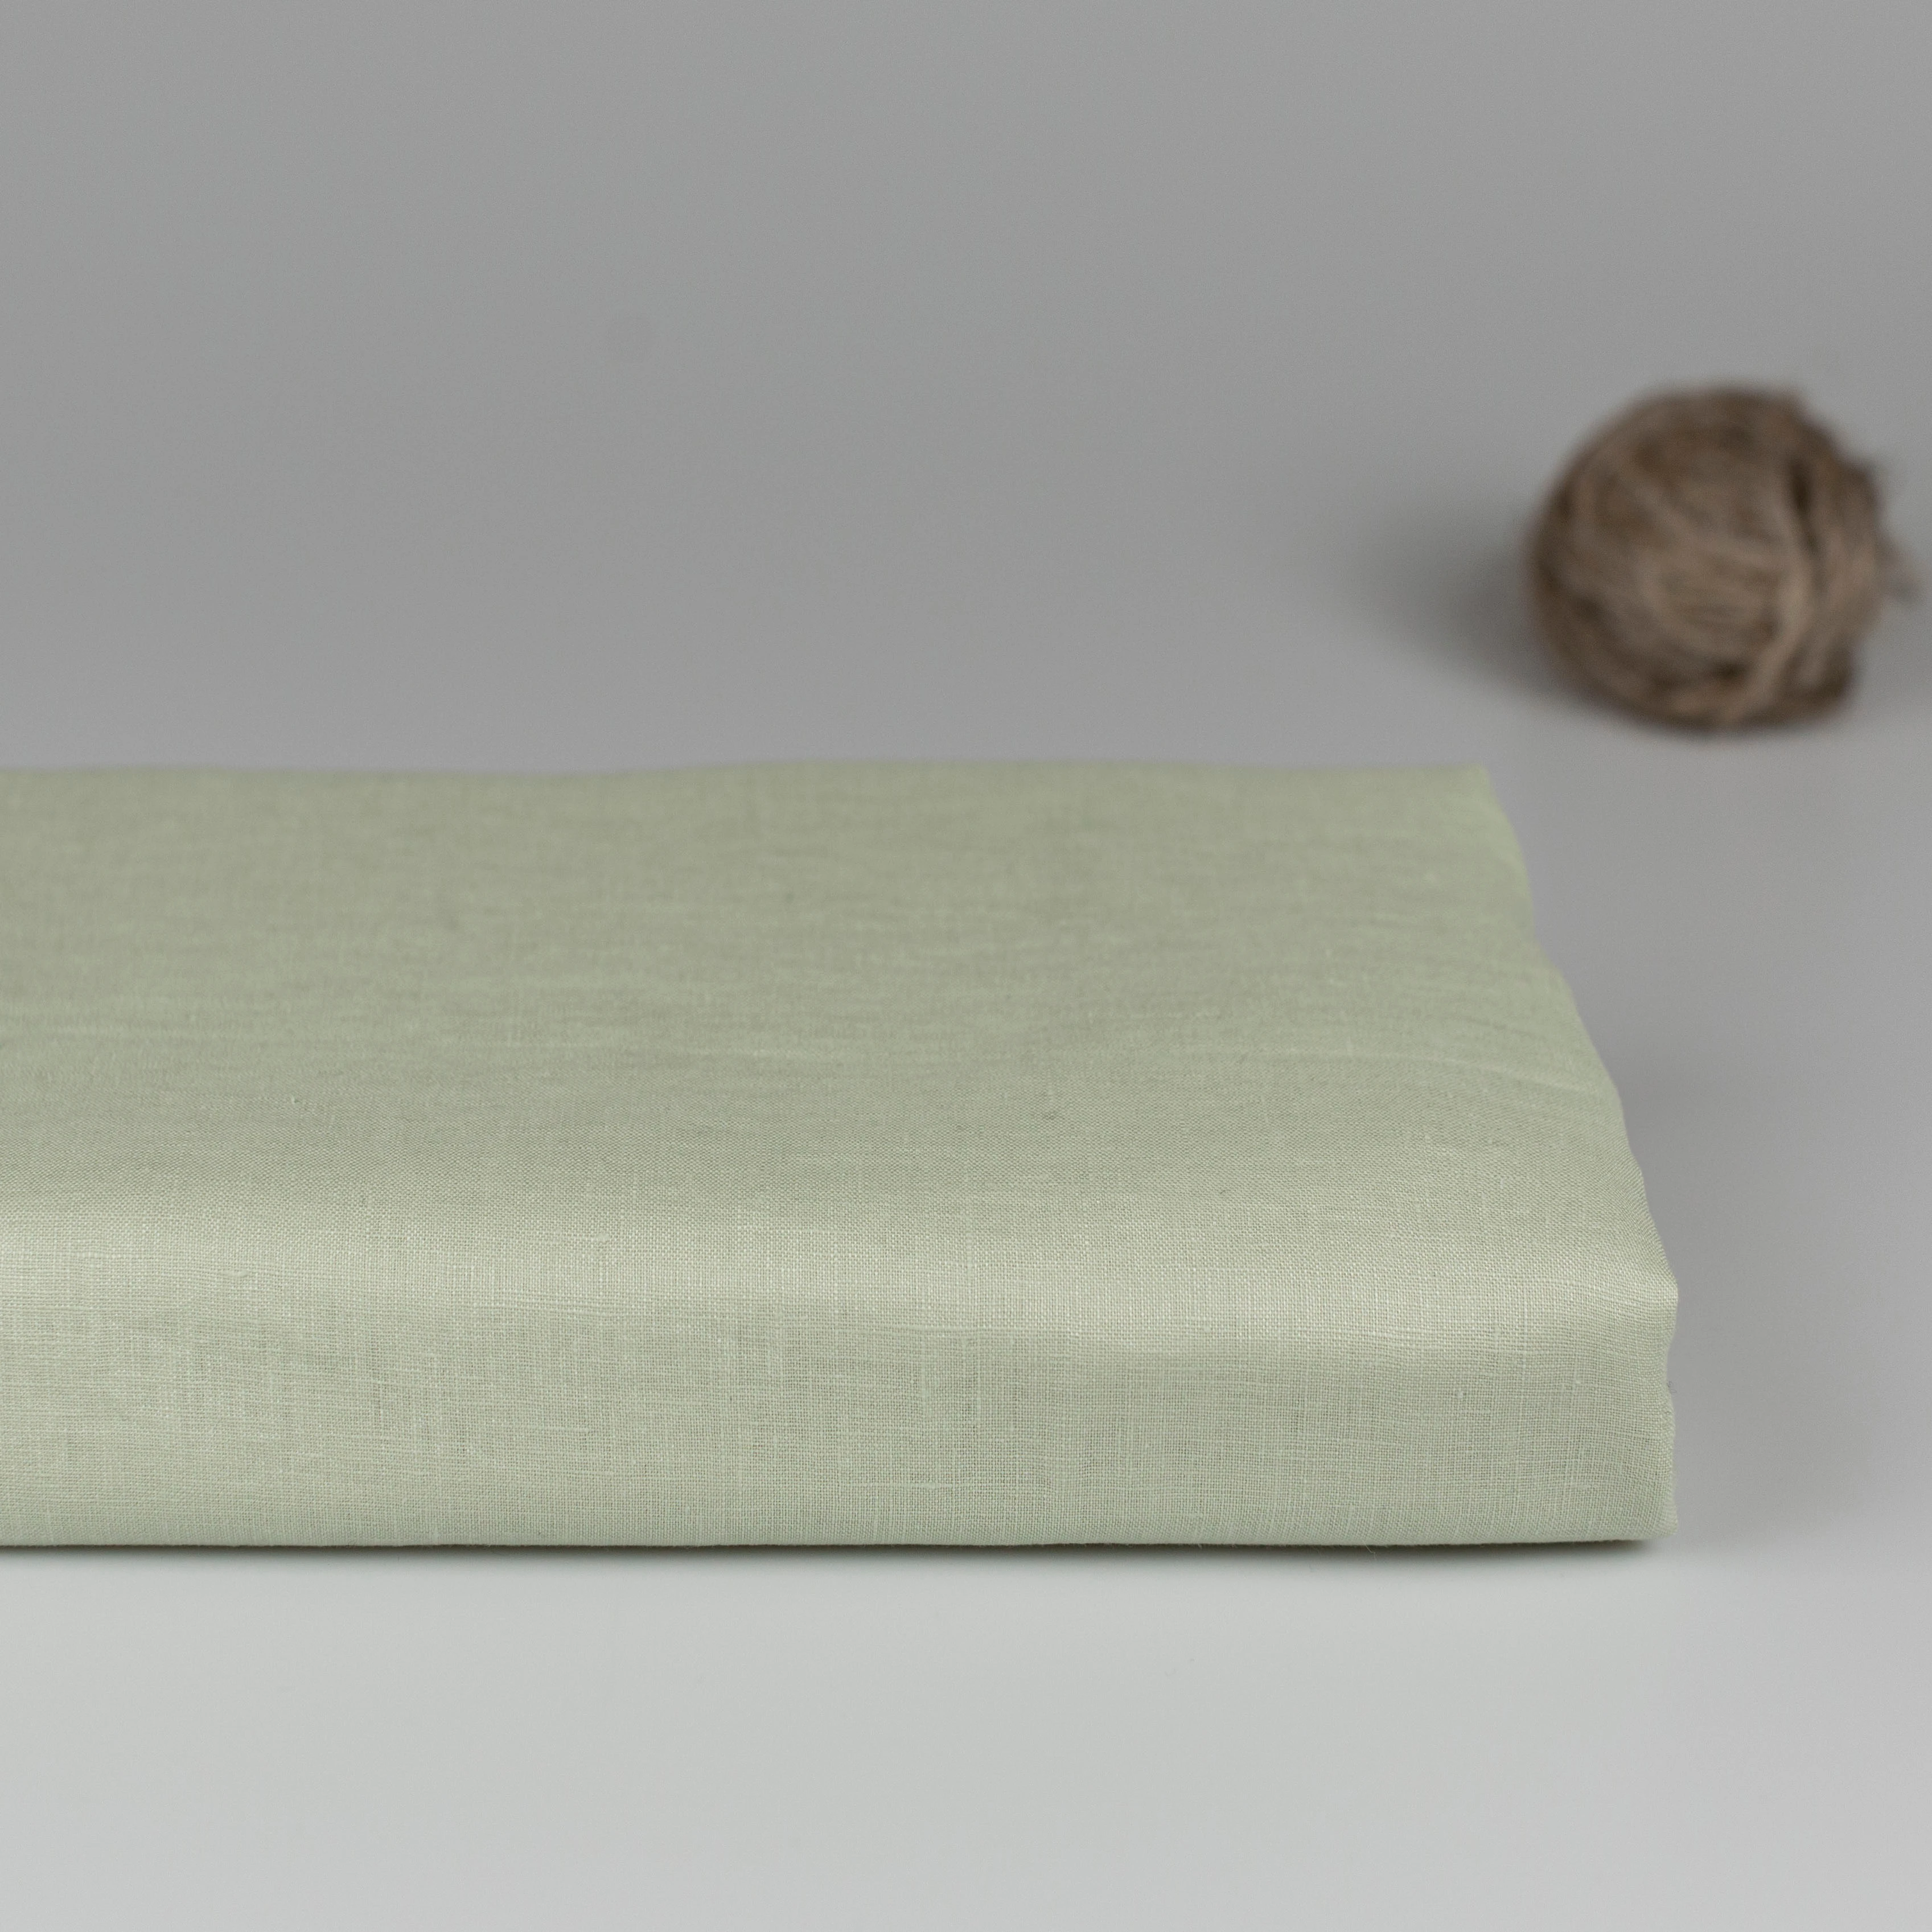 High quality 100% pure linen fabric with European Flax OEKO certification for clothing or home textile